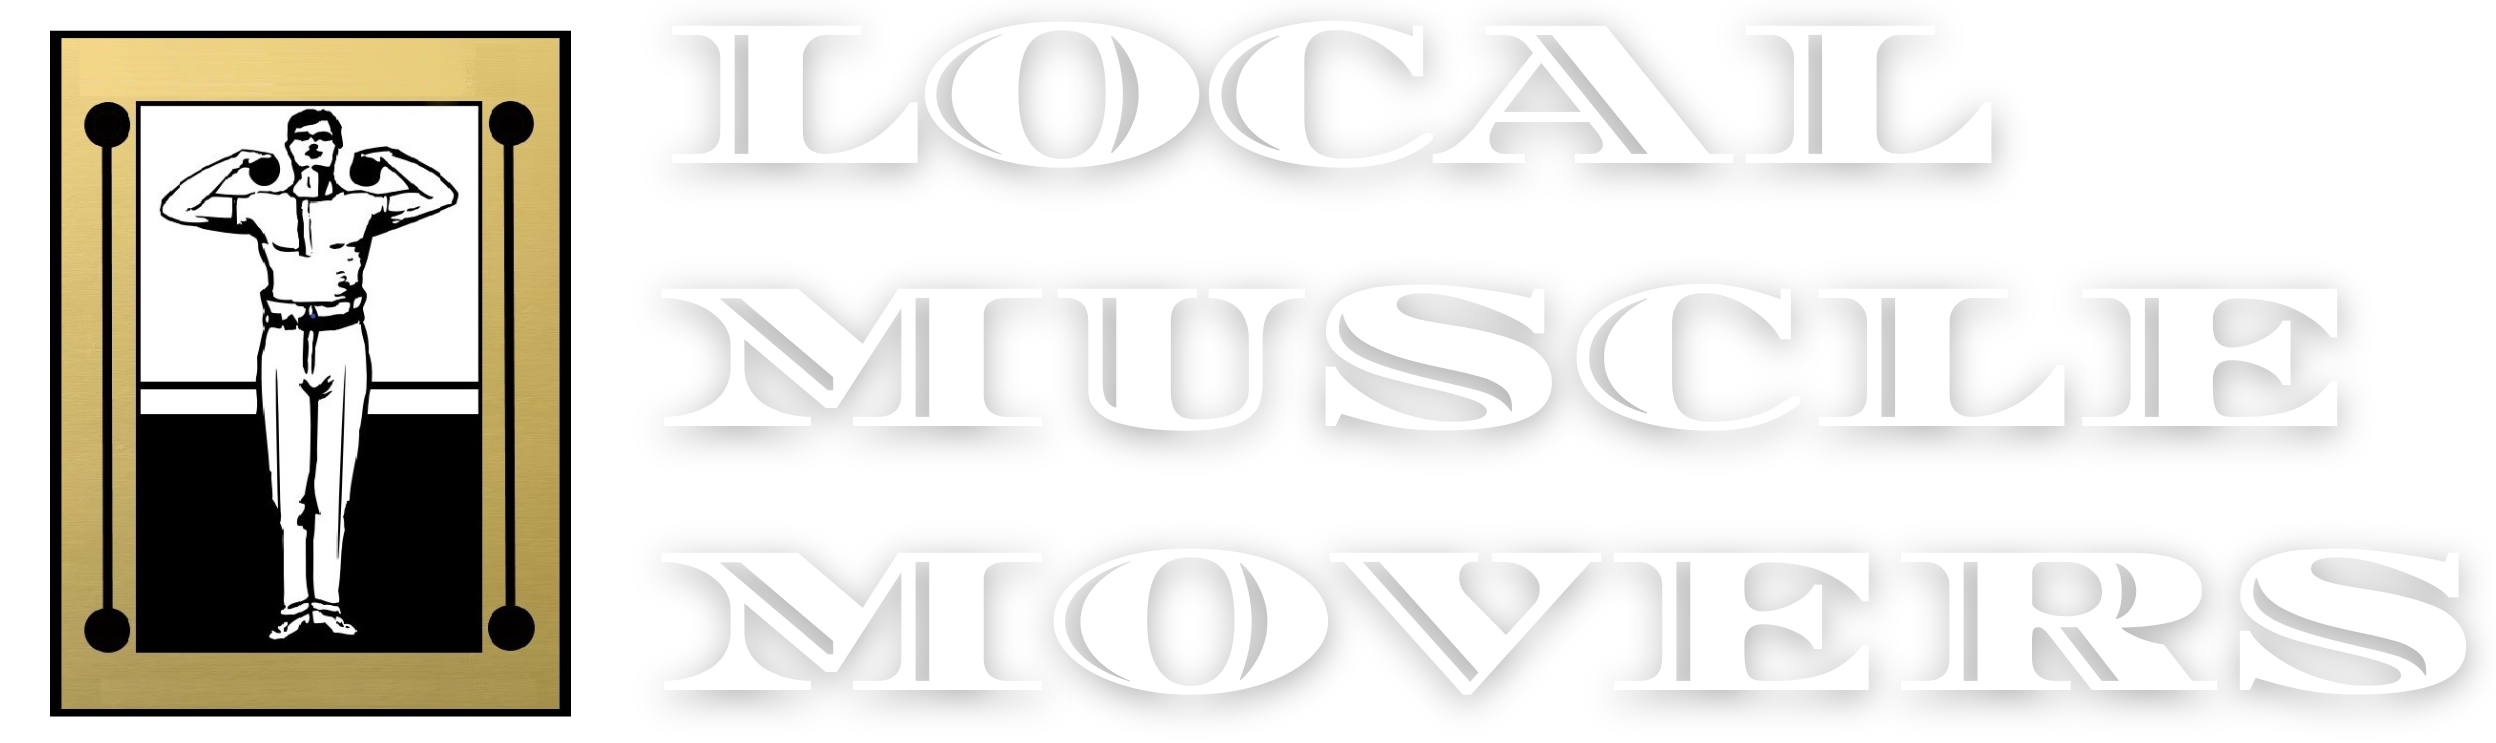 Local Muscle Movers